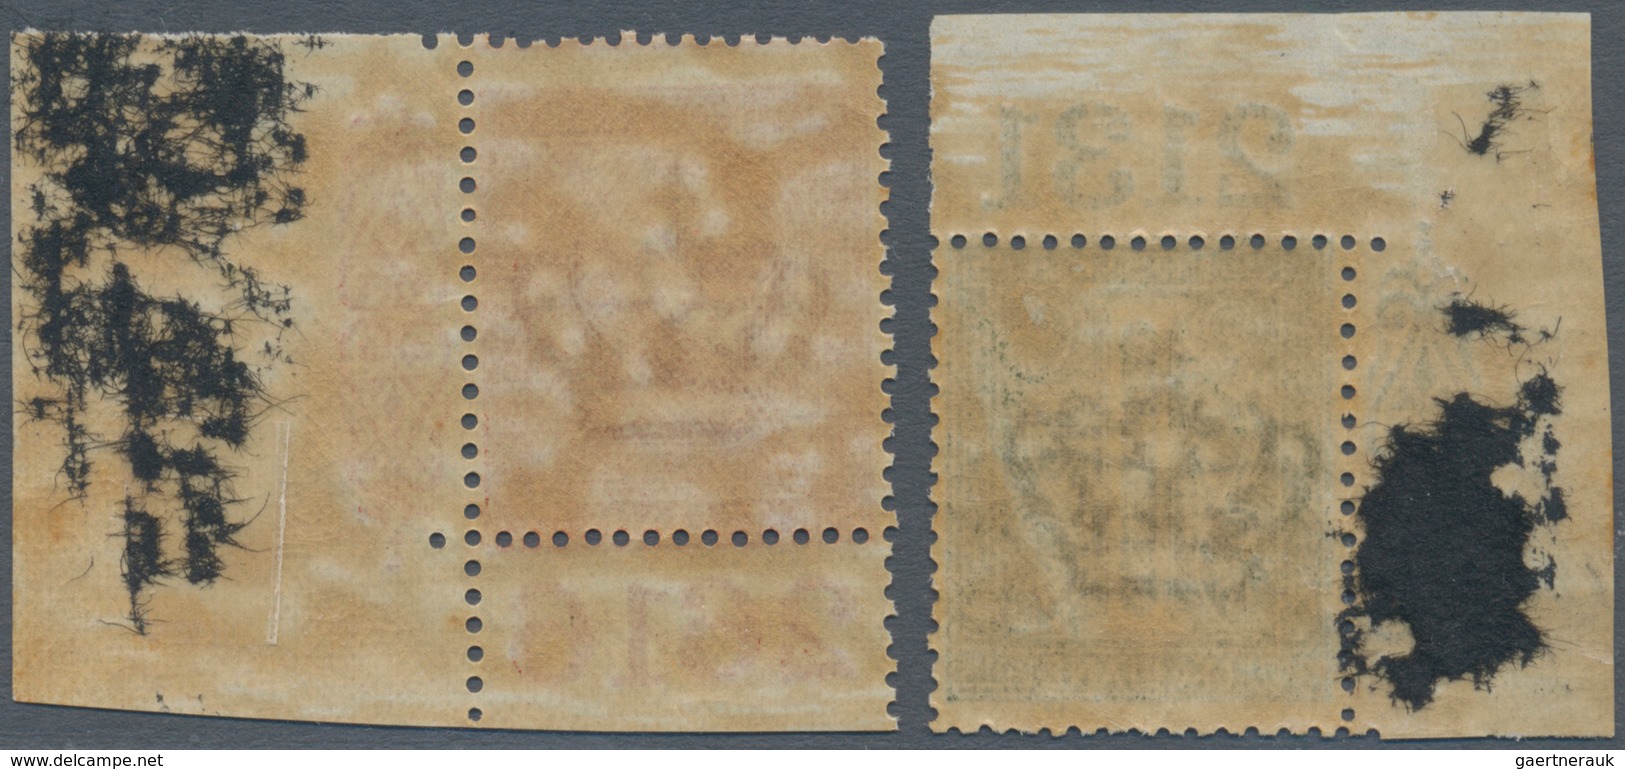 00937 Italien: 1866, 1 Cent Olive Green And 2 Cents Brick Red "digits", Turin Printing, Wide Sheet Angle W - Marcophilie